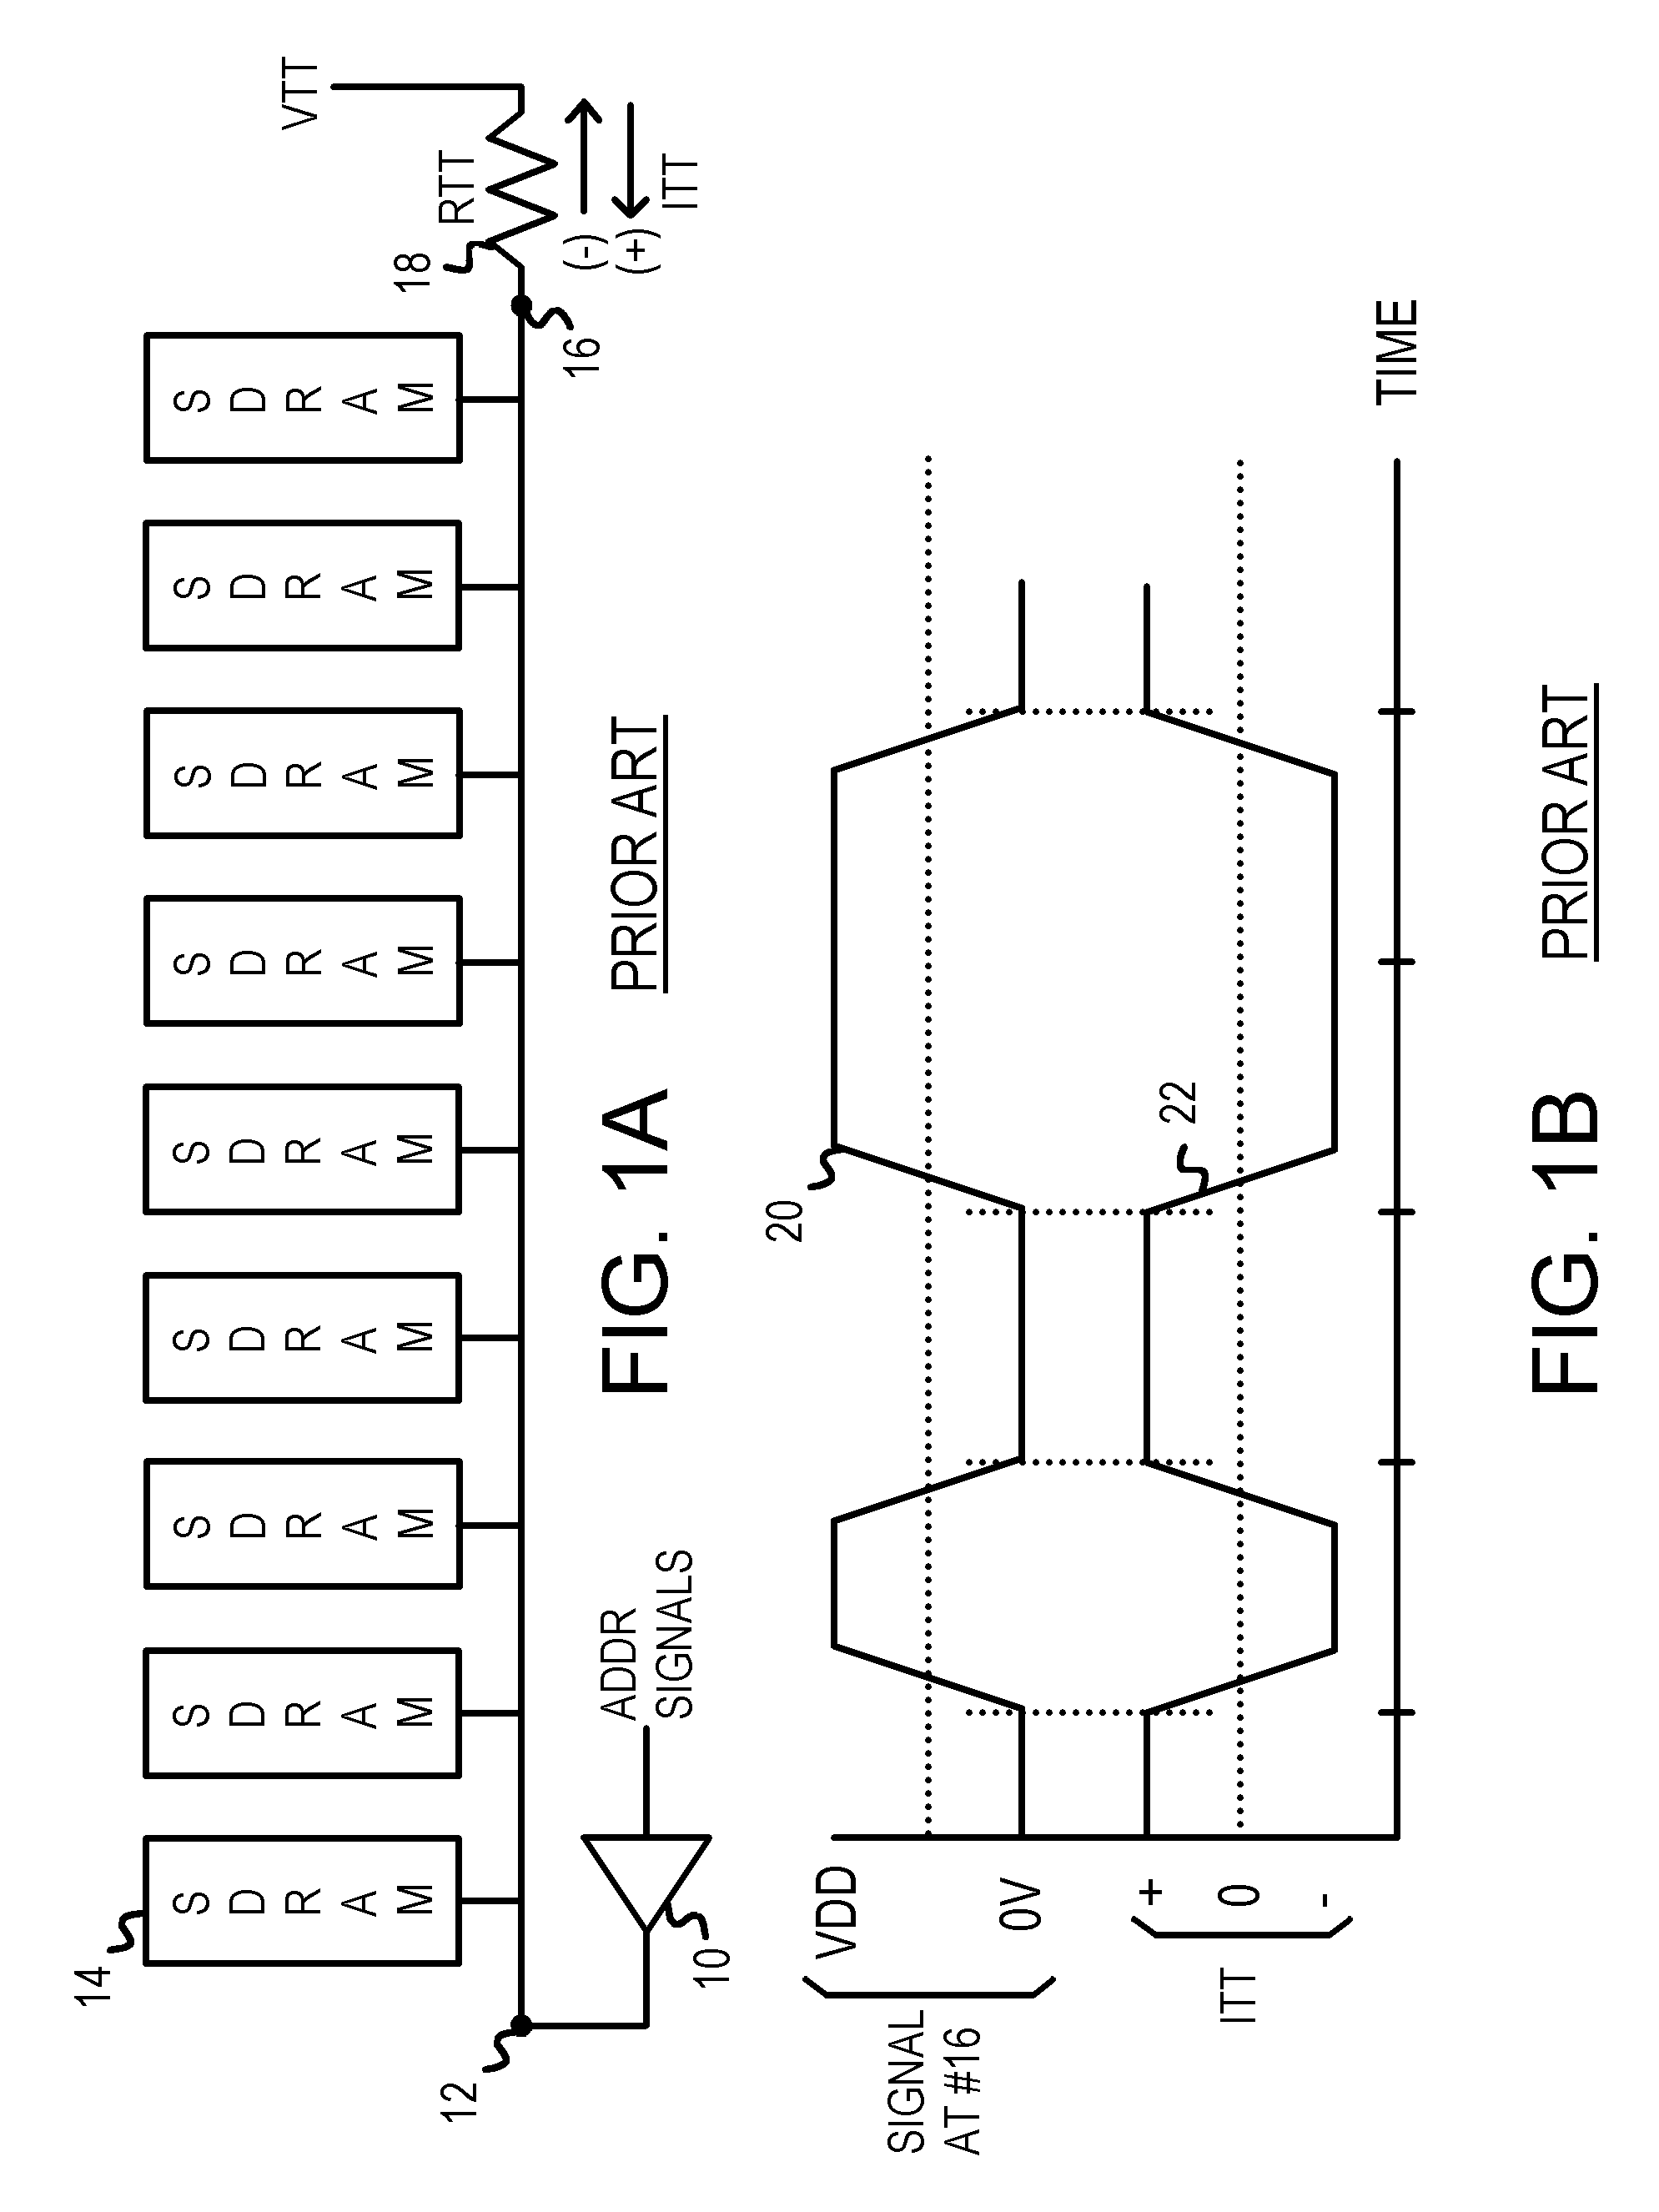 Memory module with dynamic termination using bus switches timed by memory clock and chip select